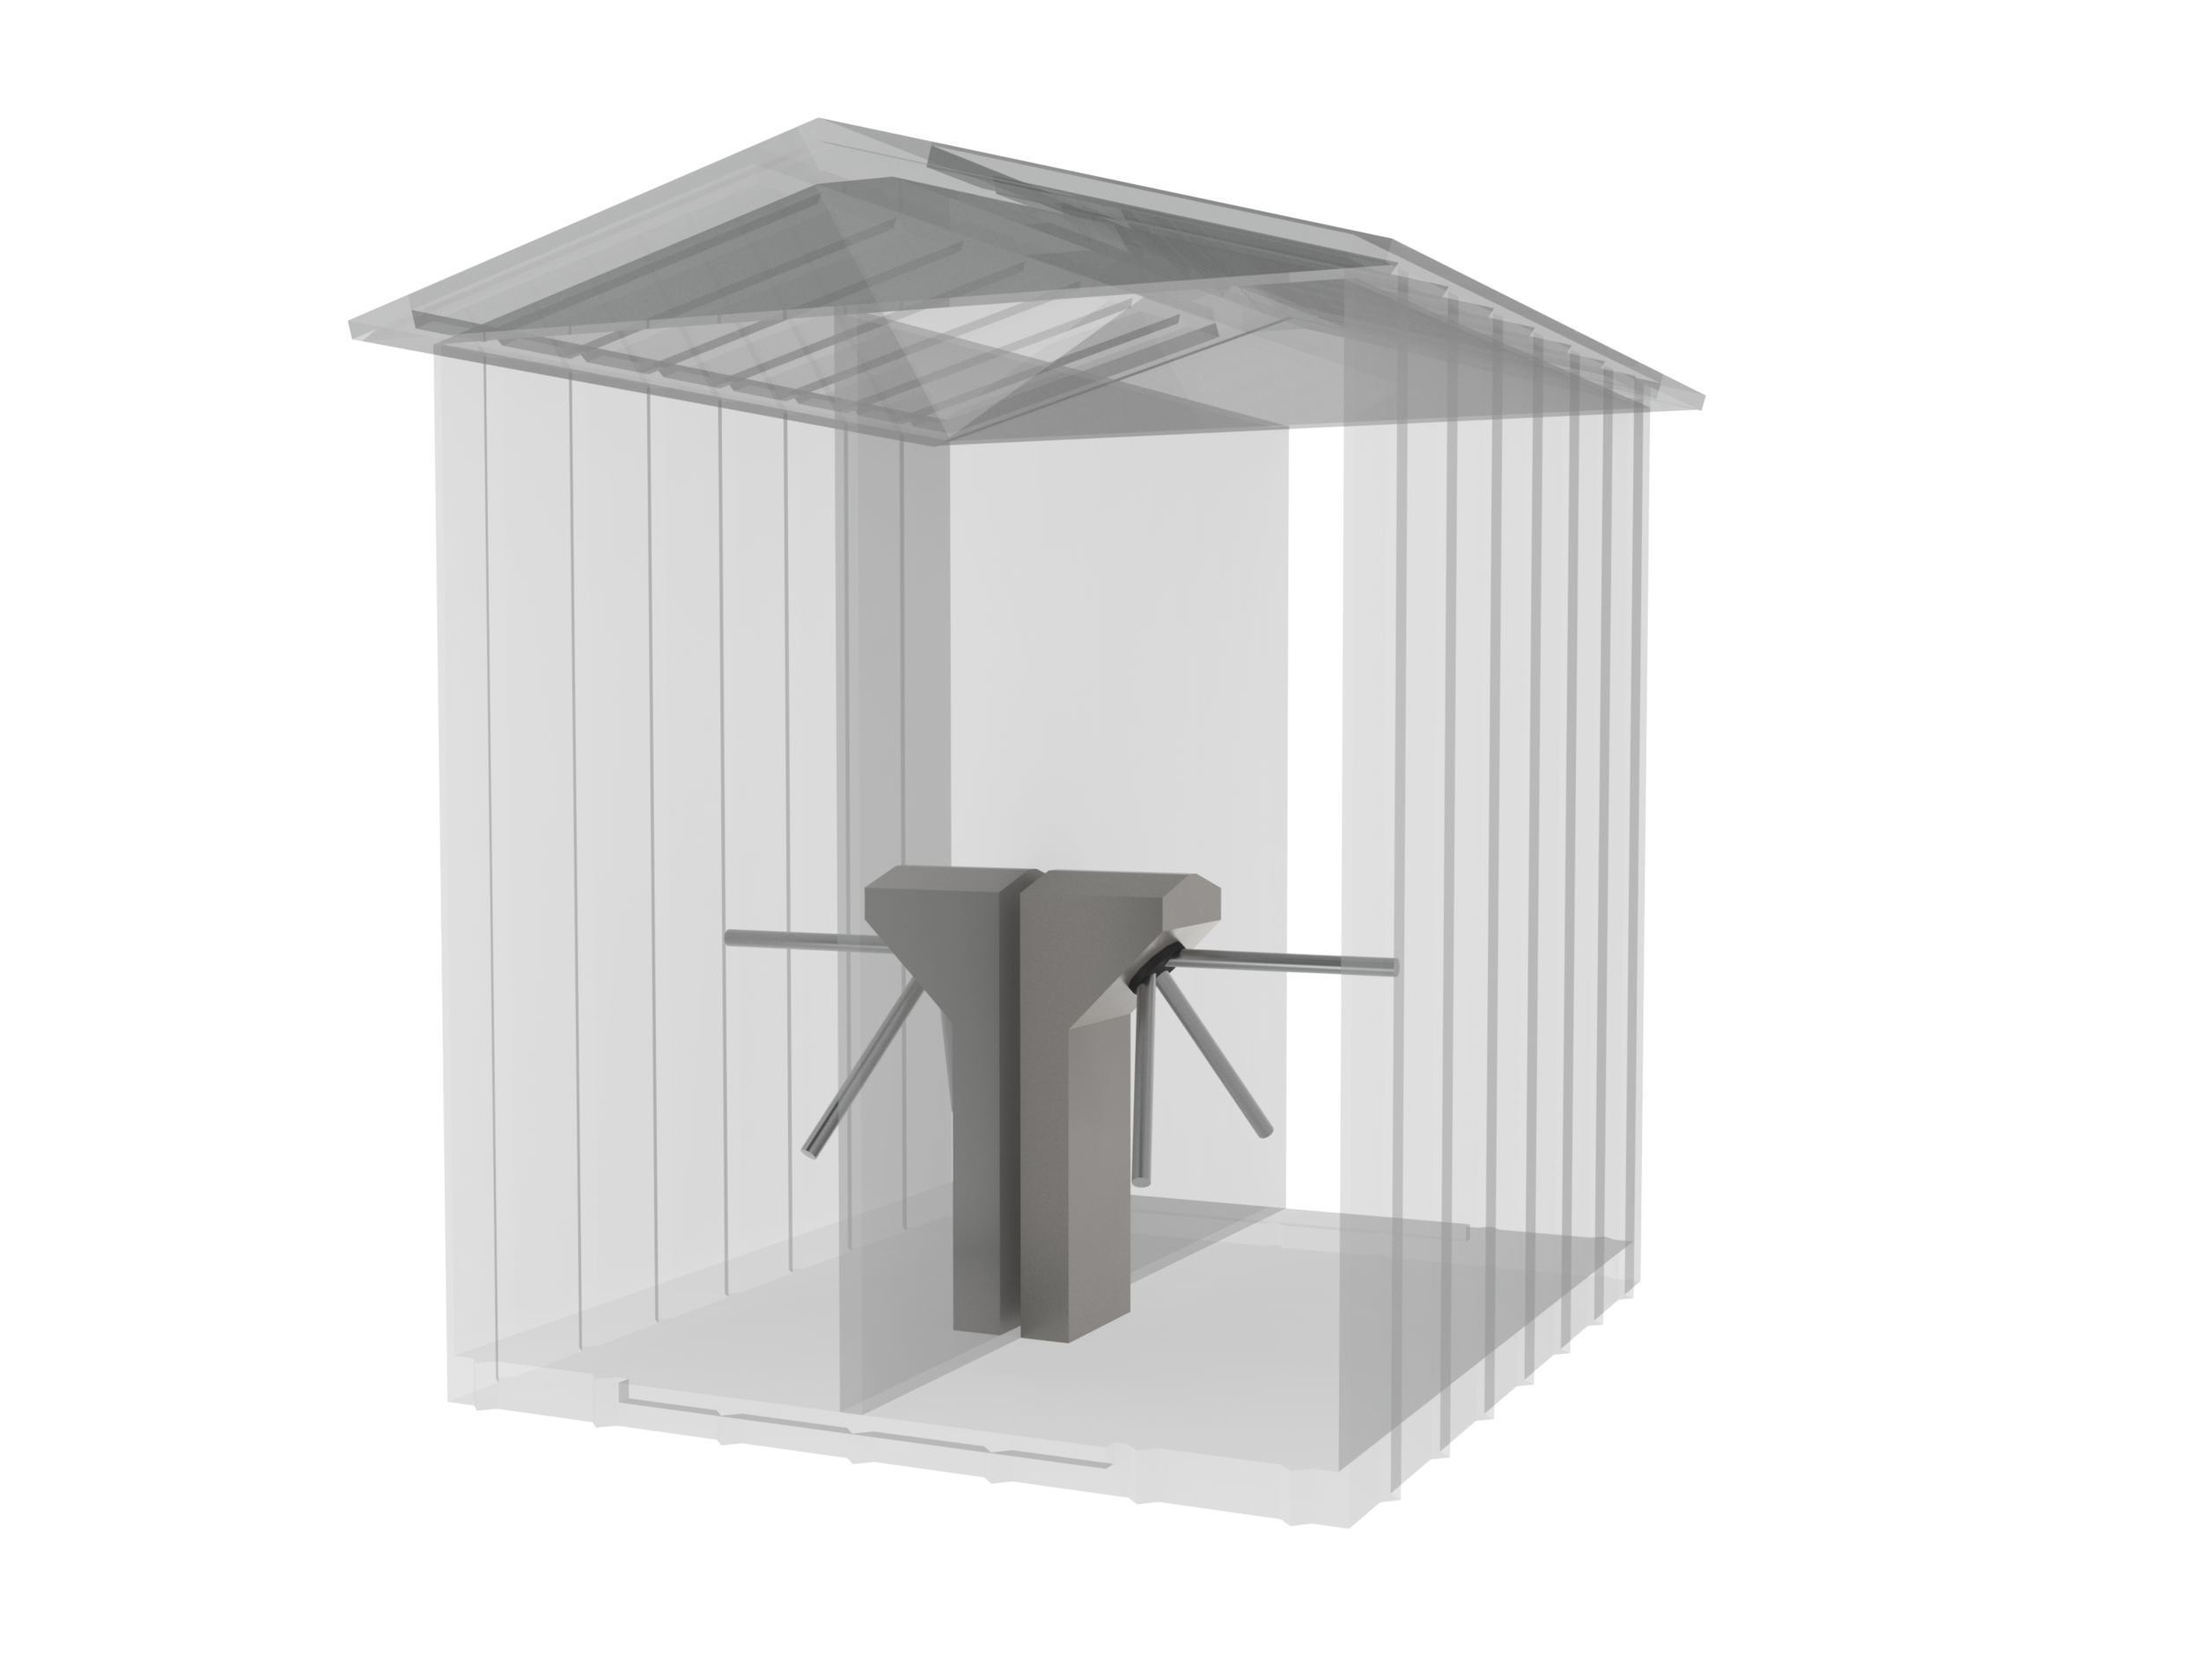 Shed with Double Turnstile Render 1-B.png